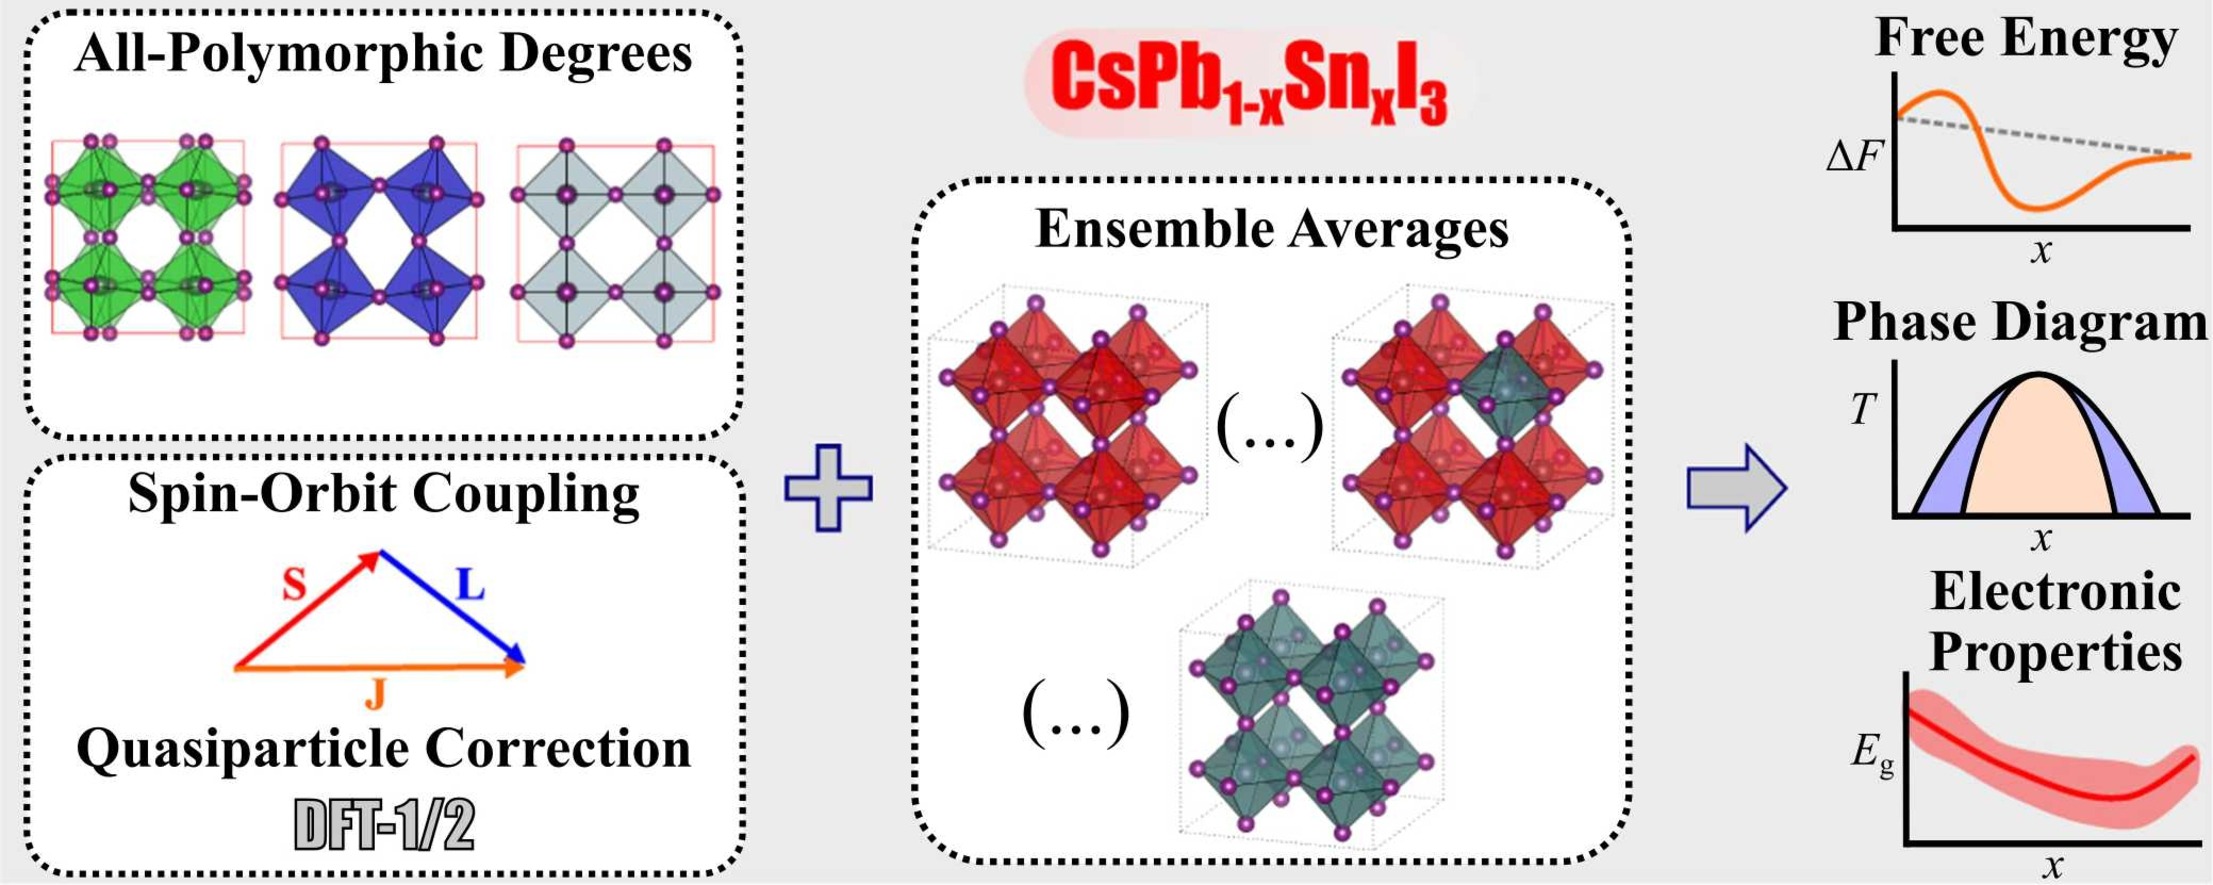 Thermodynamic modeling and electronic properties of CsPb1-xSnxI3 as a polymorphic alloy.